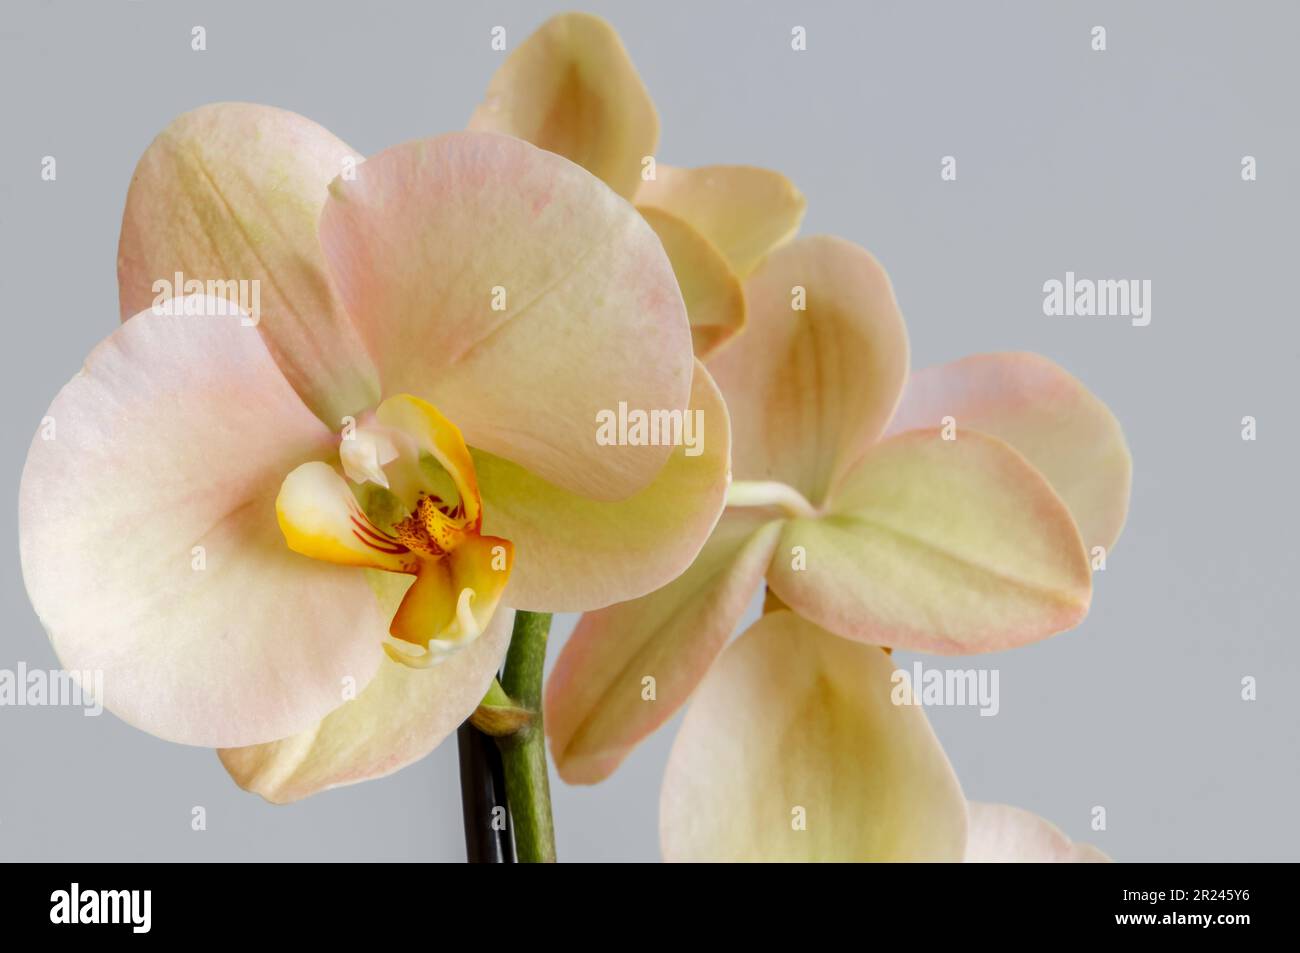 flowers of a blooming Phalaenopsis orchid, isolated from the background, a decorative plant with yellow-pink petals, close-up on a gray background Stock Photo